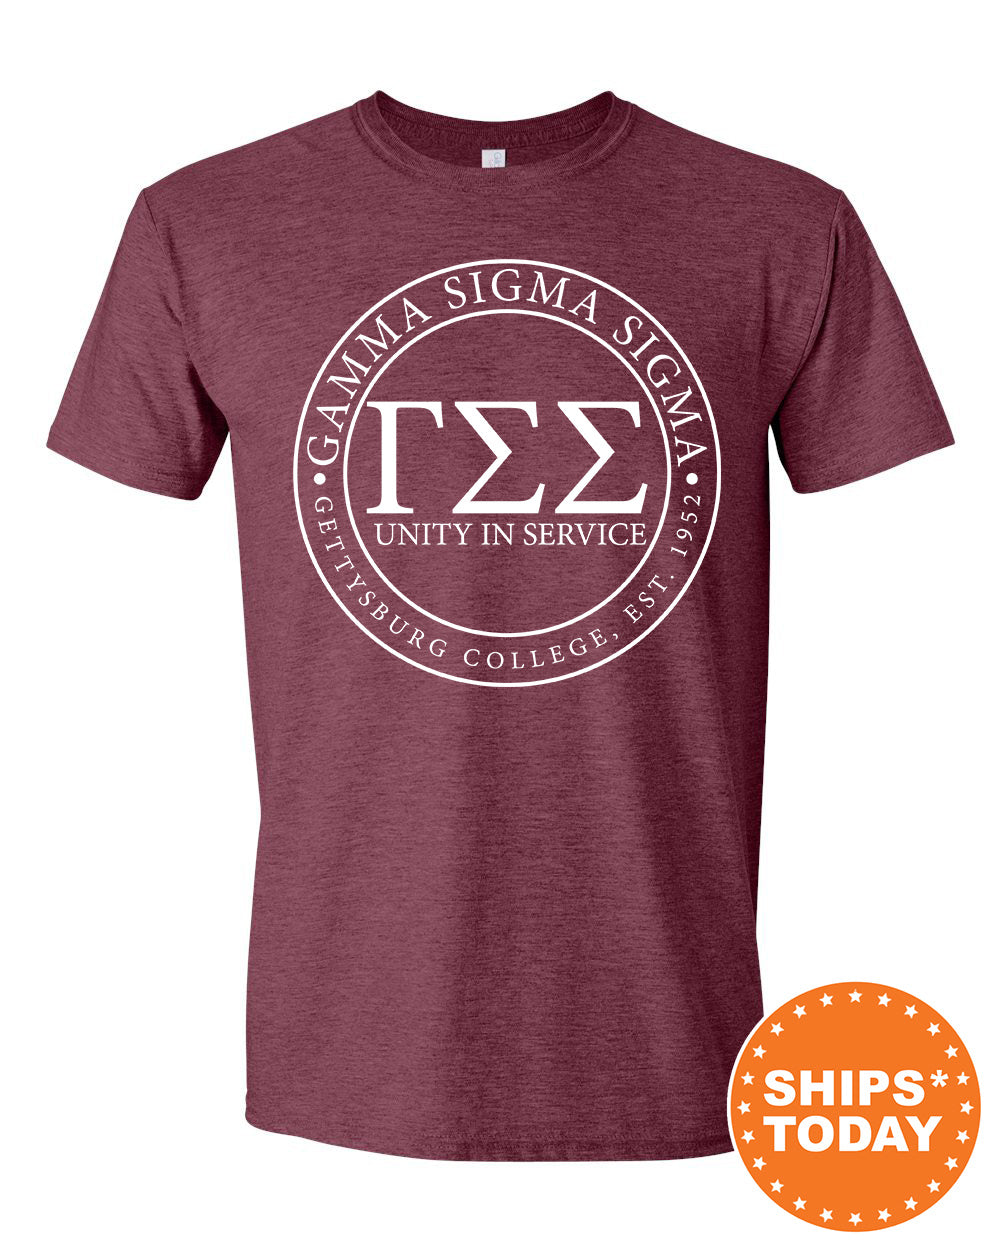 a maroon t - shirt with the logo of the university of texas